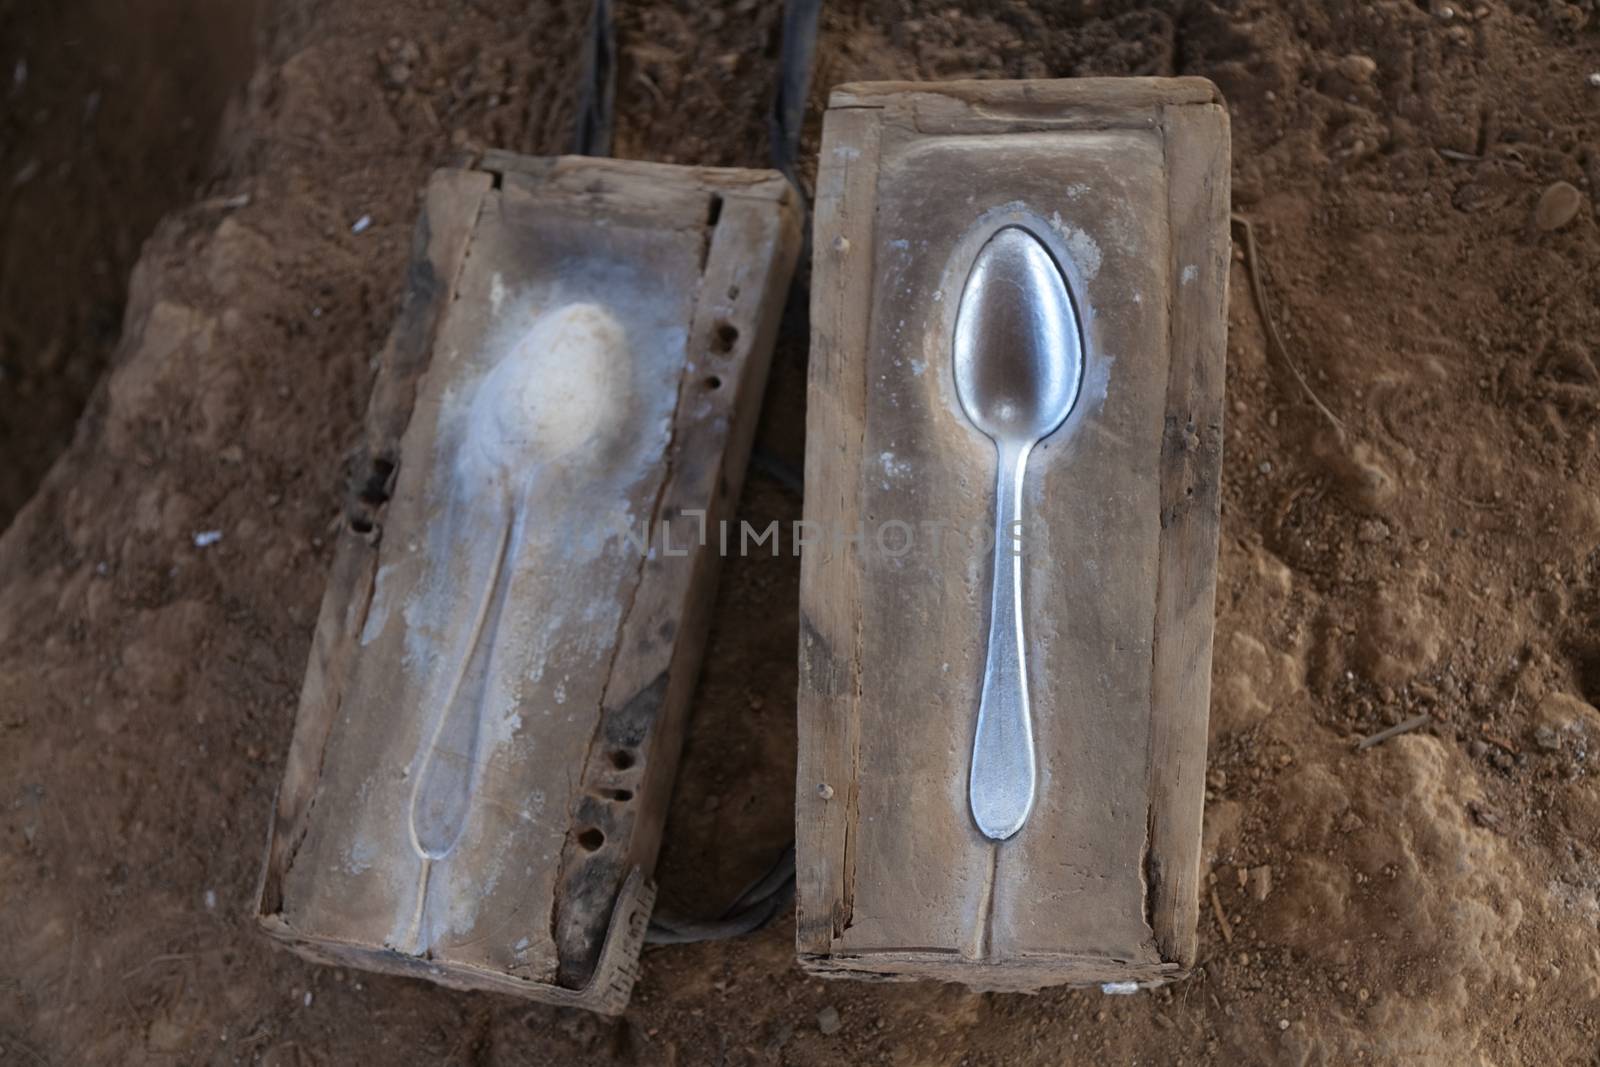 Ban Napia Laos village that makes spoons from bombs leftover from Vietnam war by kgboxford